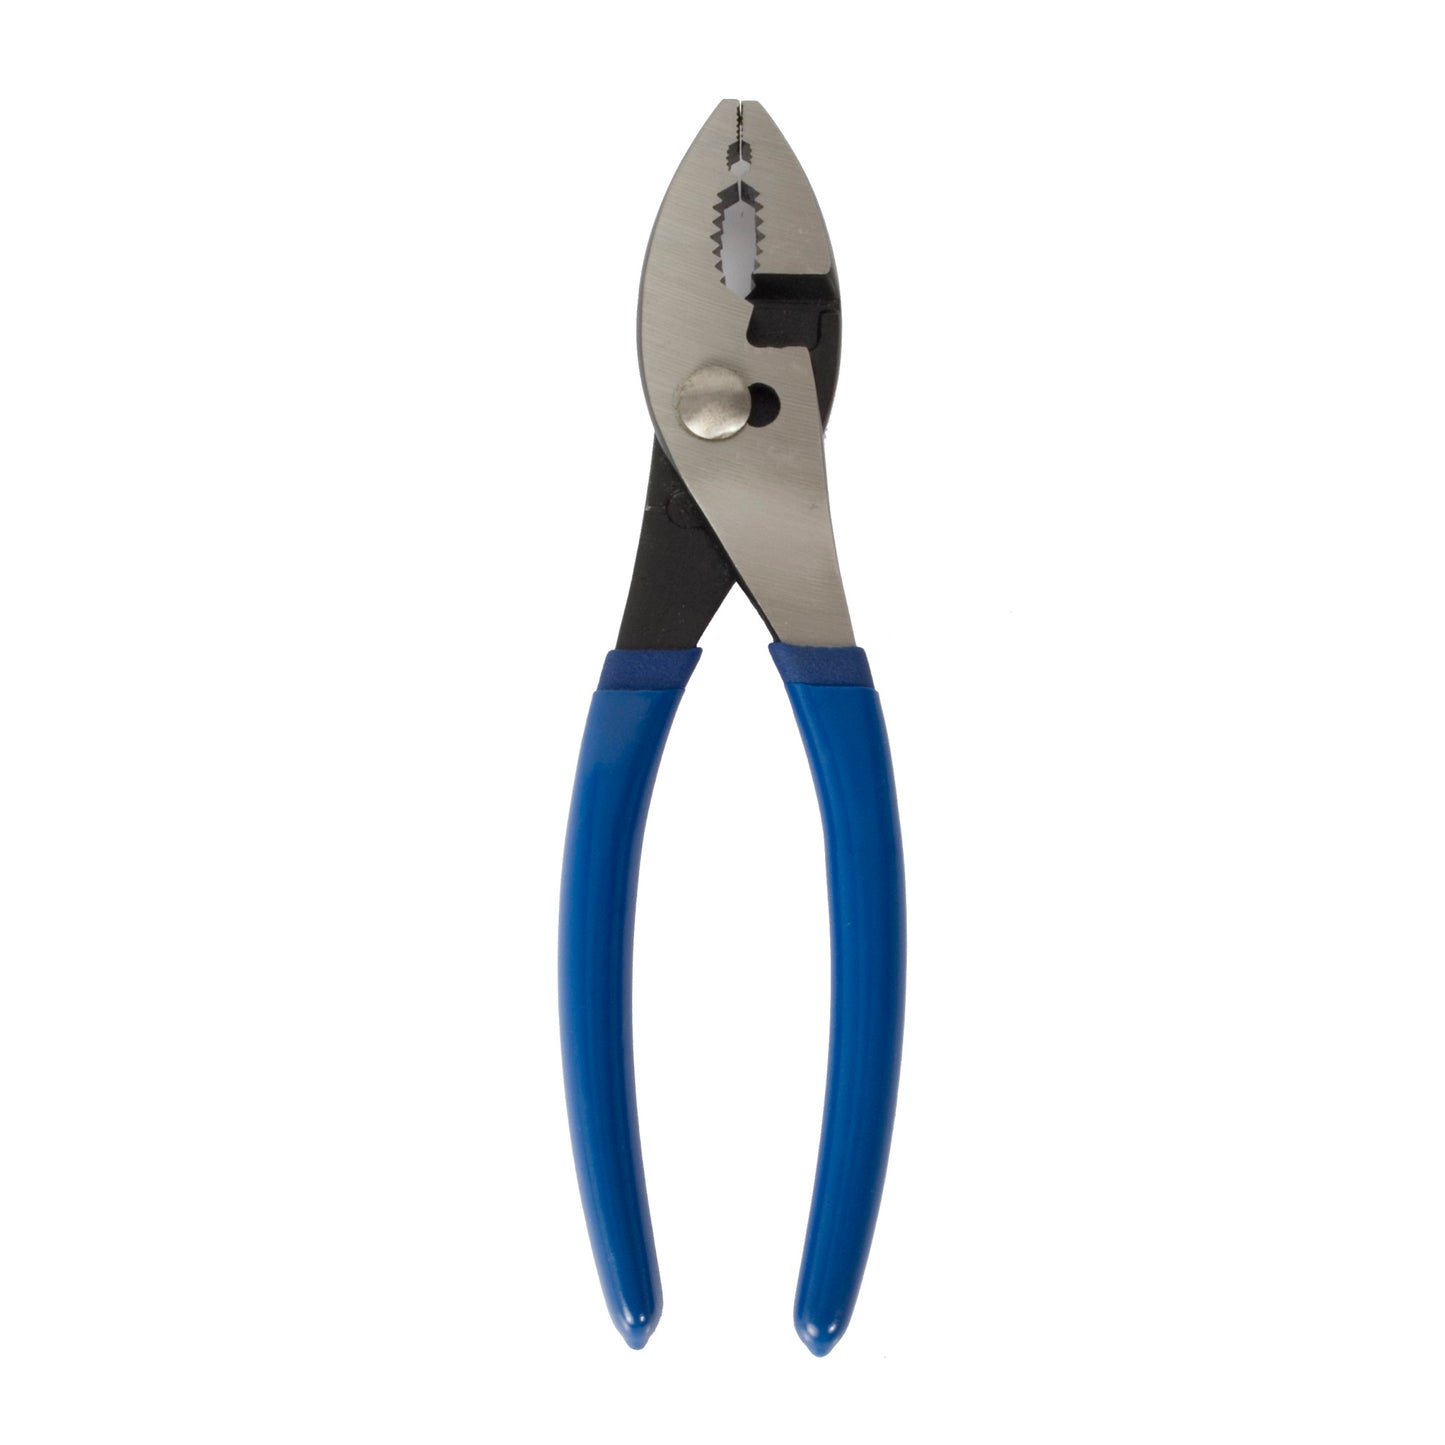 8-Inch Long Slip-Joint Pliers with Wire Cutter and Dual Layer Black Grip